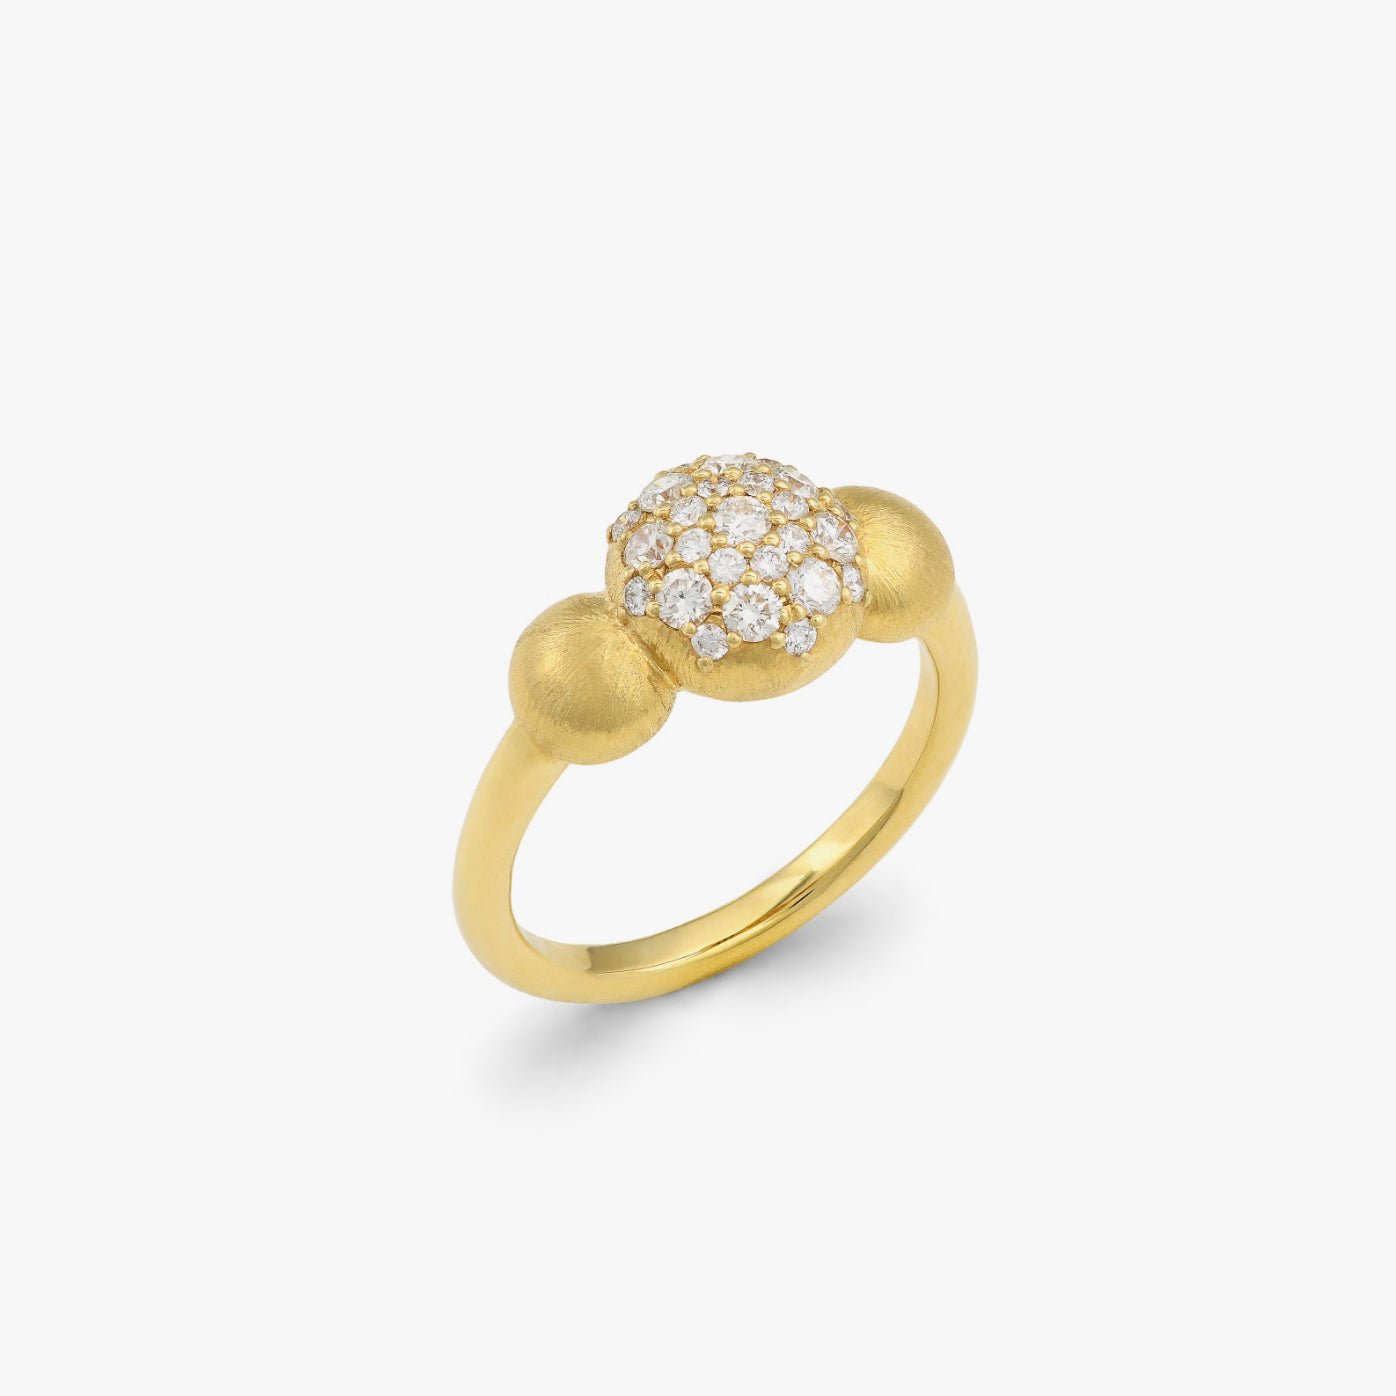 Small Constellation Ring with Diamonds